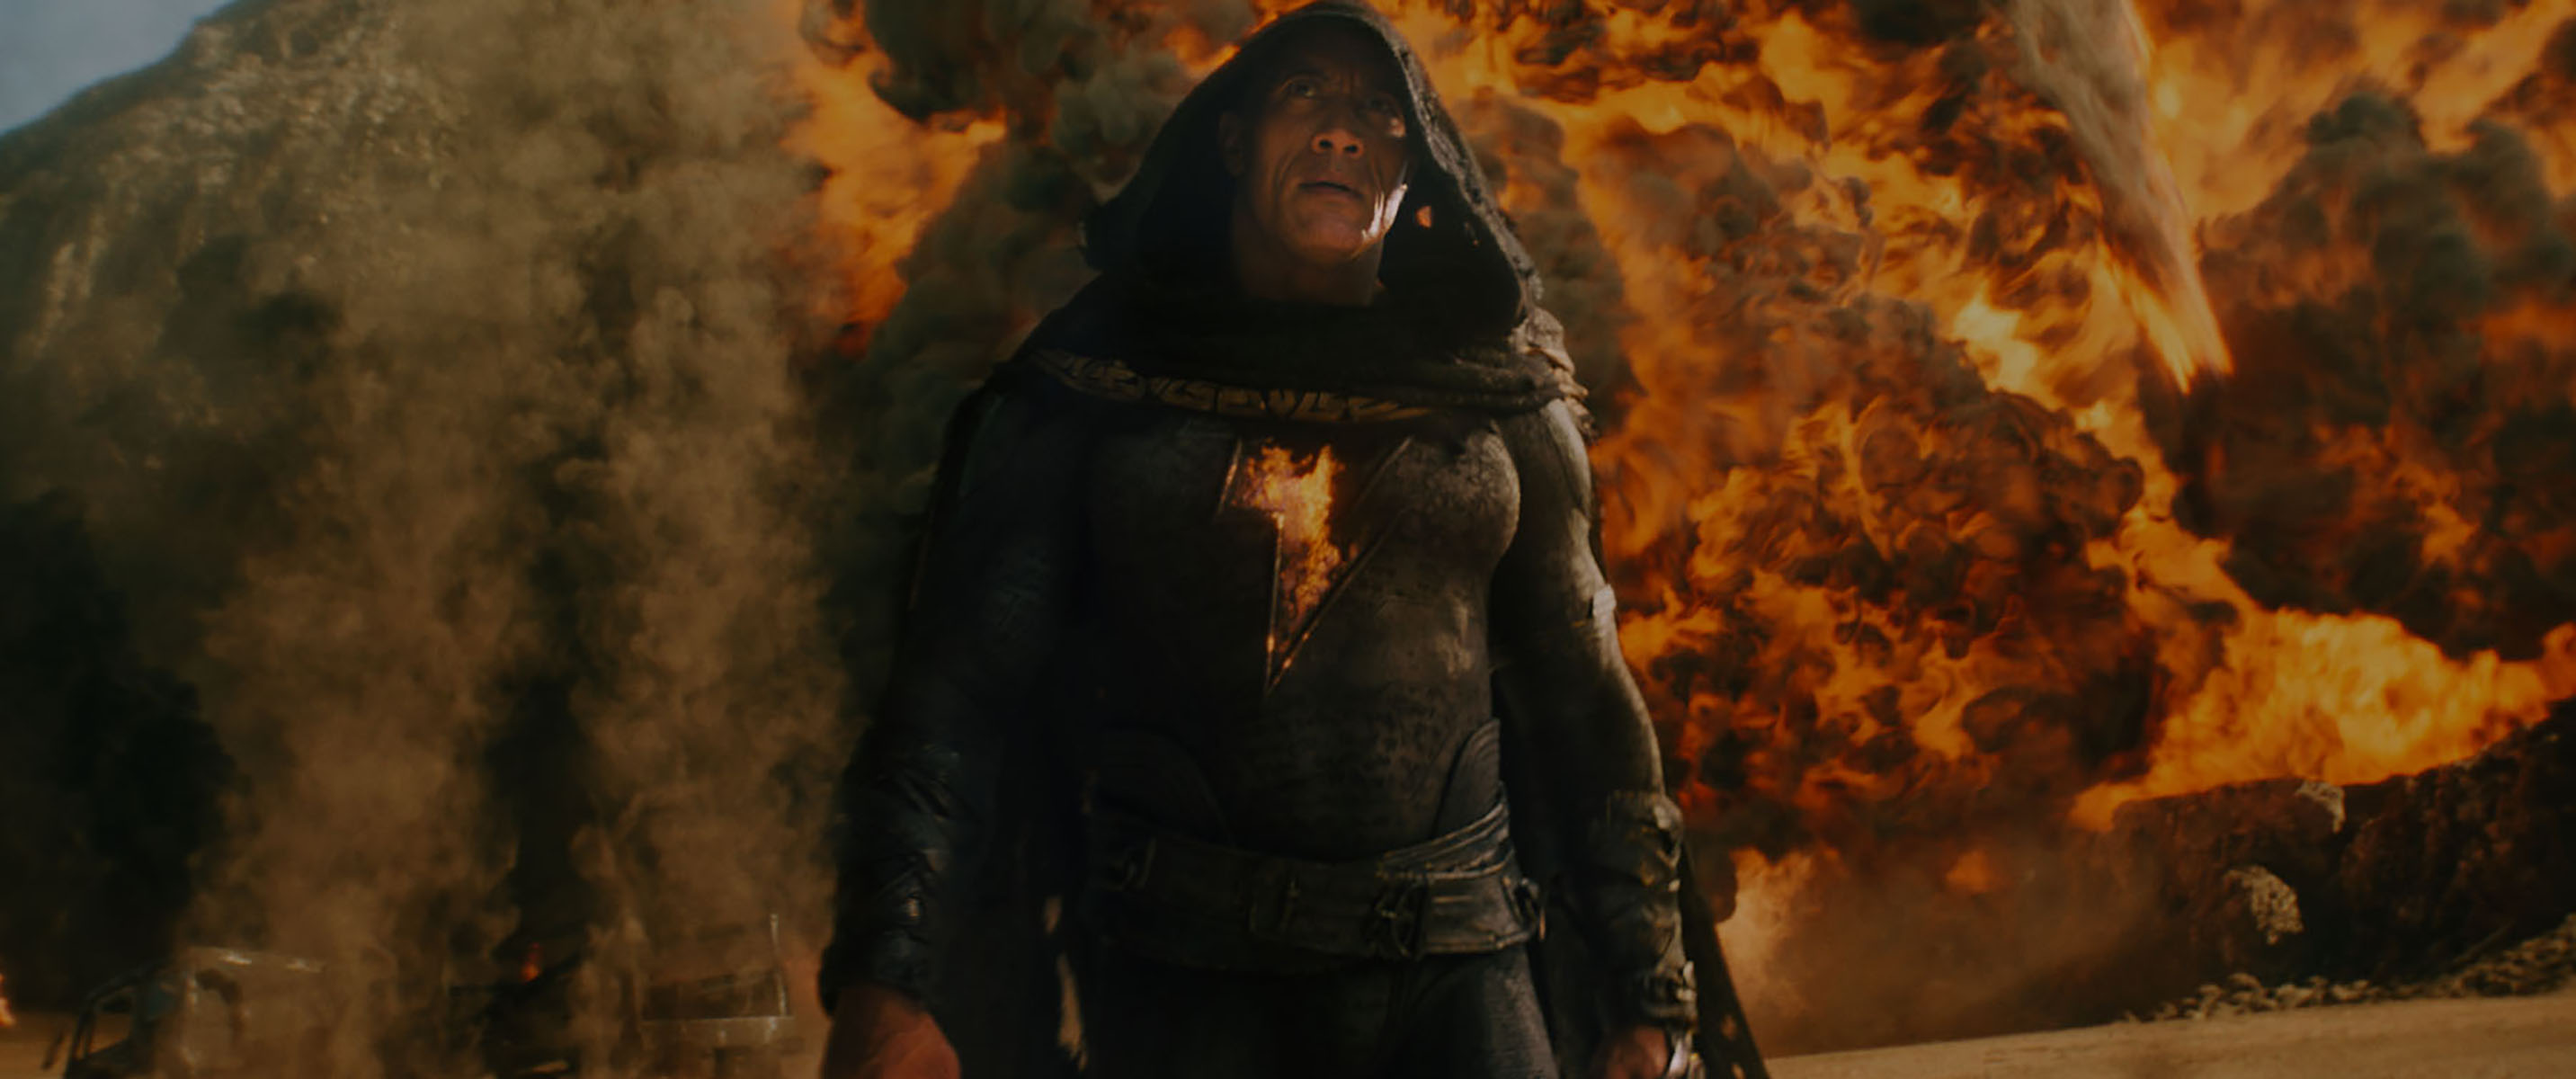 Black Adam Bends A Knee For No One In First Full Trailer